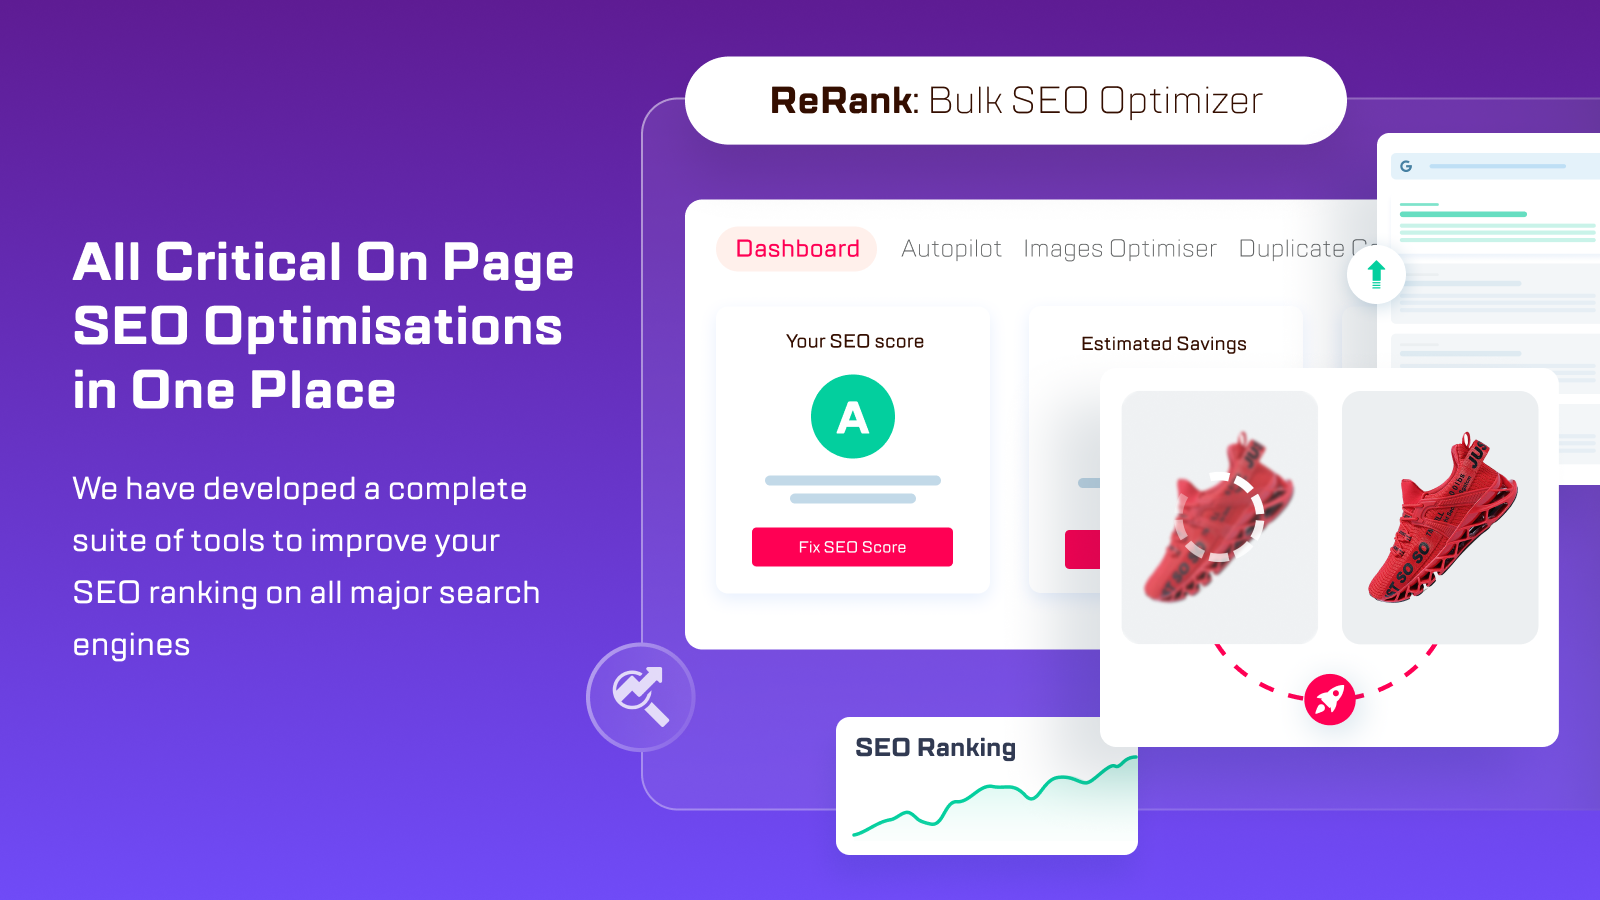 All Critical On Page SEO Optimisations in One Place